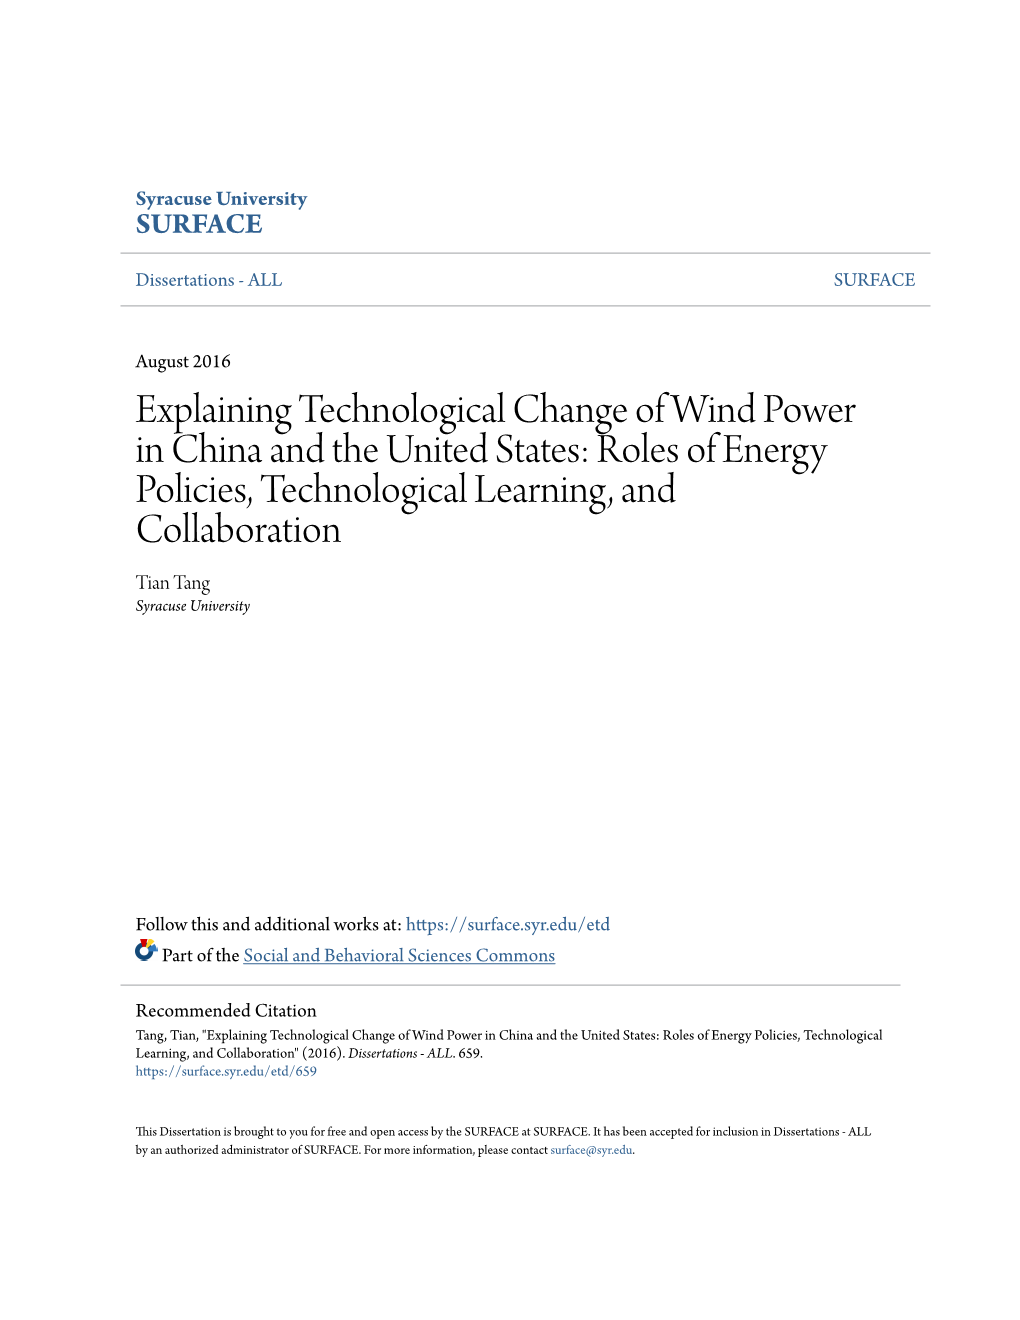 Explaining Technological Change of Wind Power in China and The